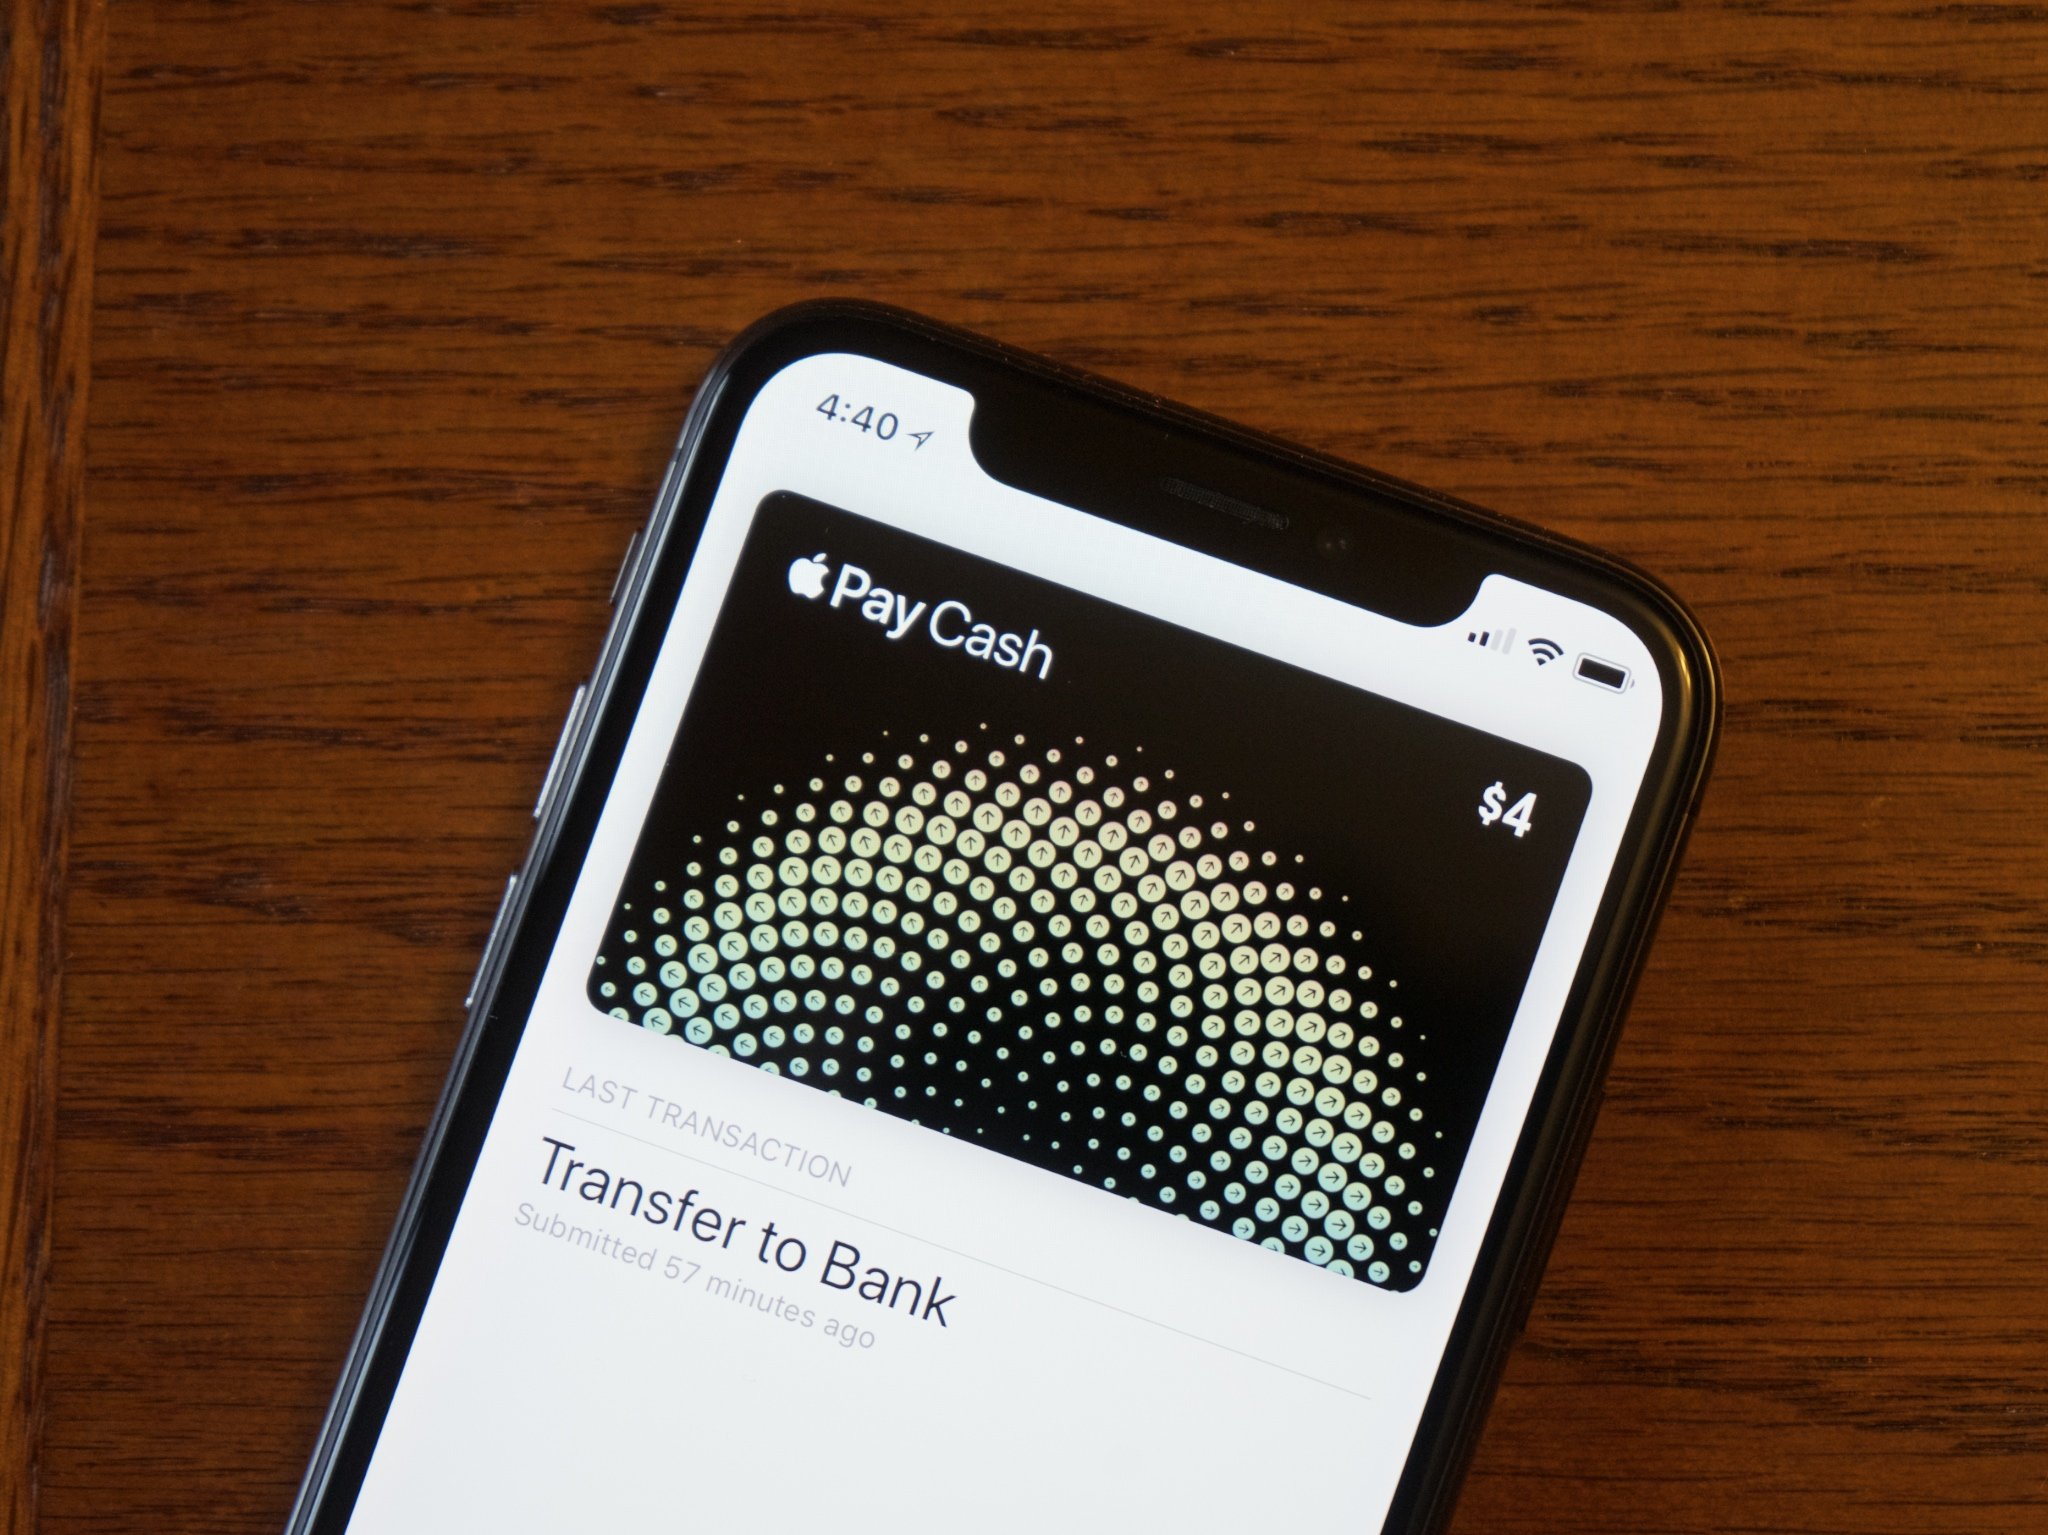 How to send money to friends in Messages using Apple Pay